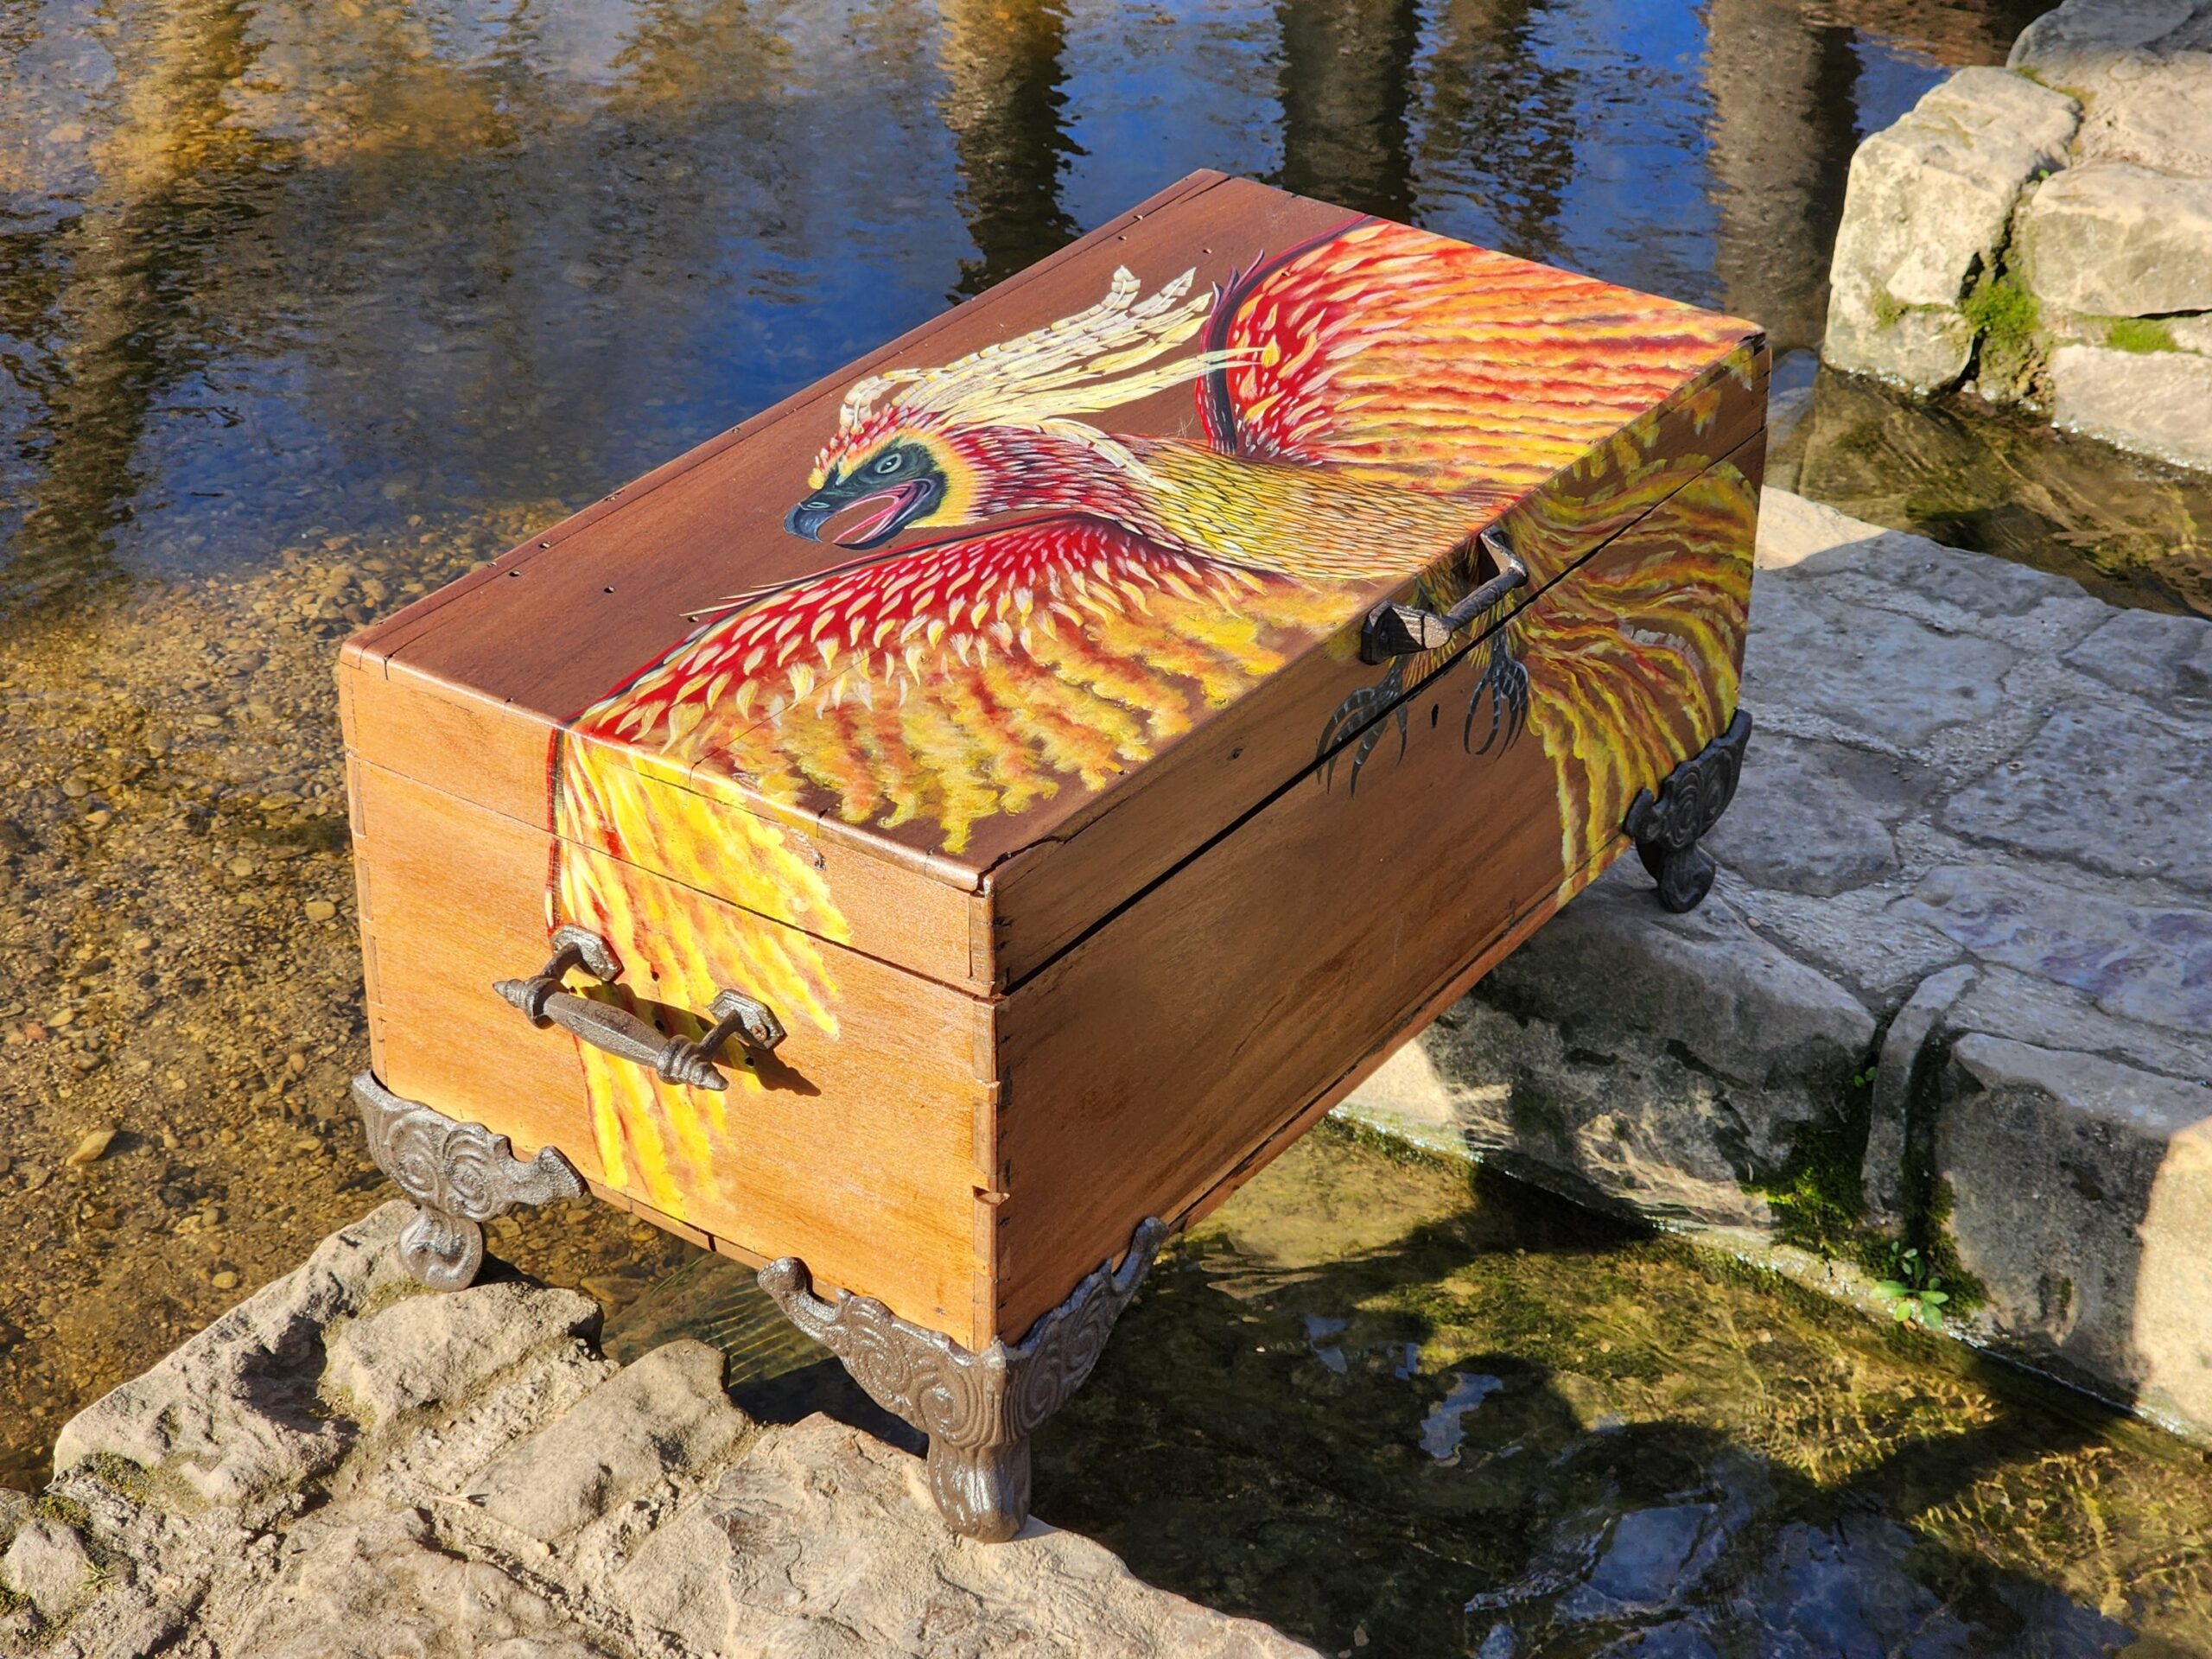 This is an antique walnut wood chest/box that I repurposed into a trinket box. I had to sand it off, and then I handpainted the design of the phoenix over the box with acrylic paint. Then, the box was varnished to protect it from external debris. The feet and the handles are made of cast iron and were professionally installed on the box. I decided to leave the inside of the box untouched to show the age of the box and to give it character.